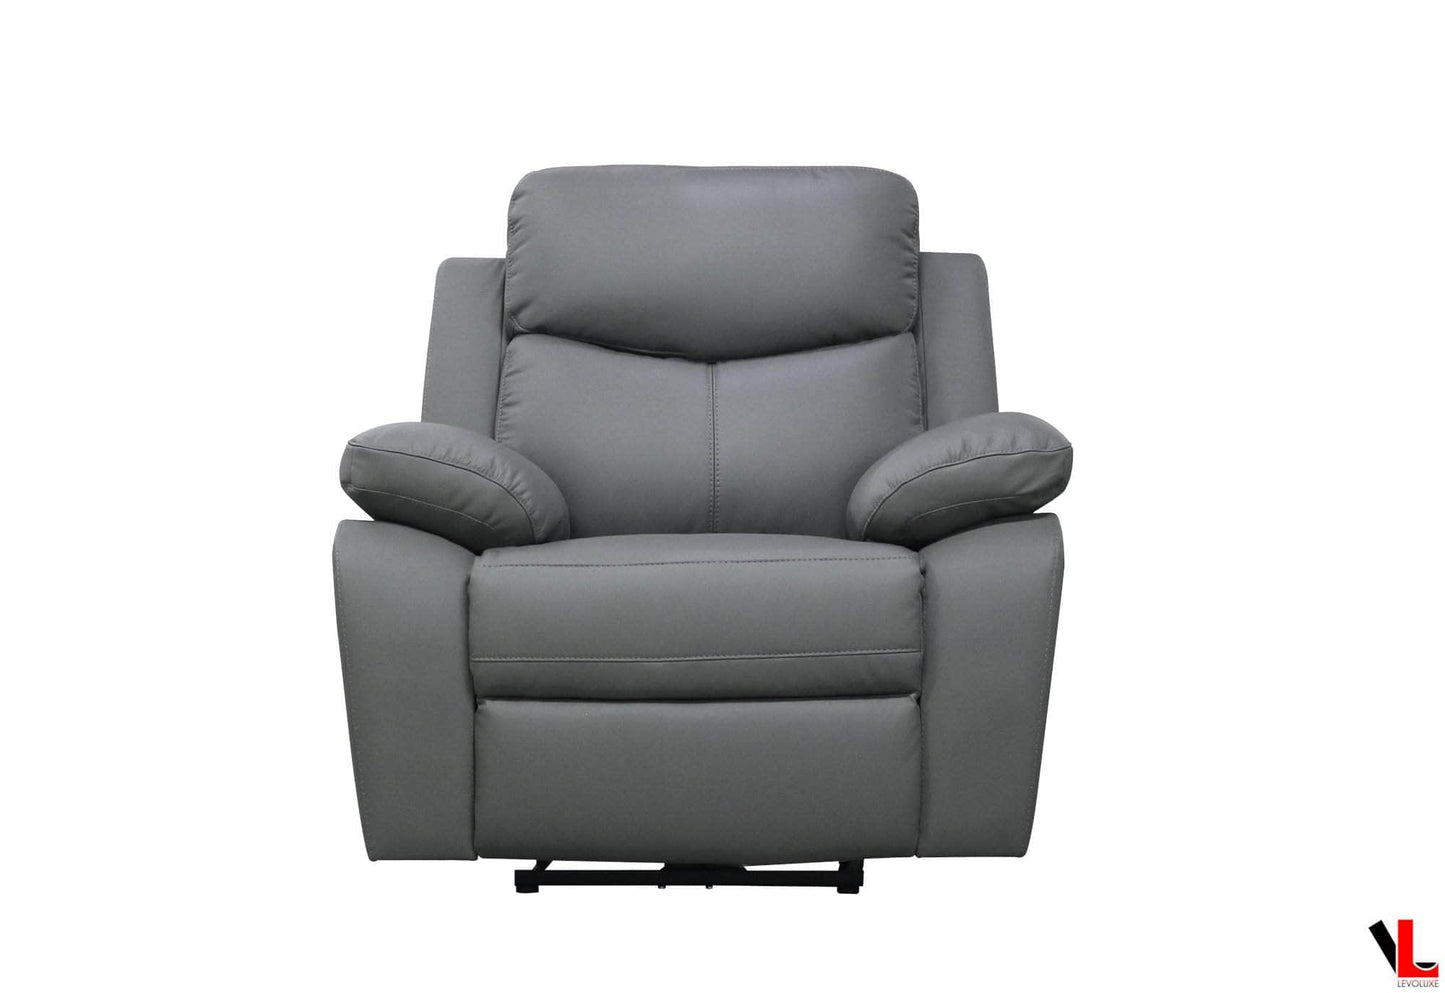 Levoluxe Chair Grey Aveon 38.5" Pillow Top Arm Reclining Chair in Leather Match - Available in 2 Colours